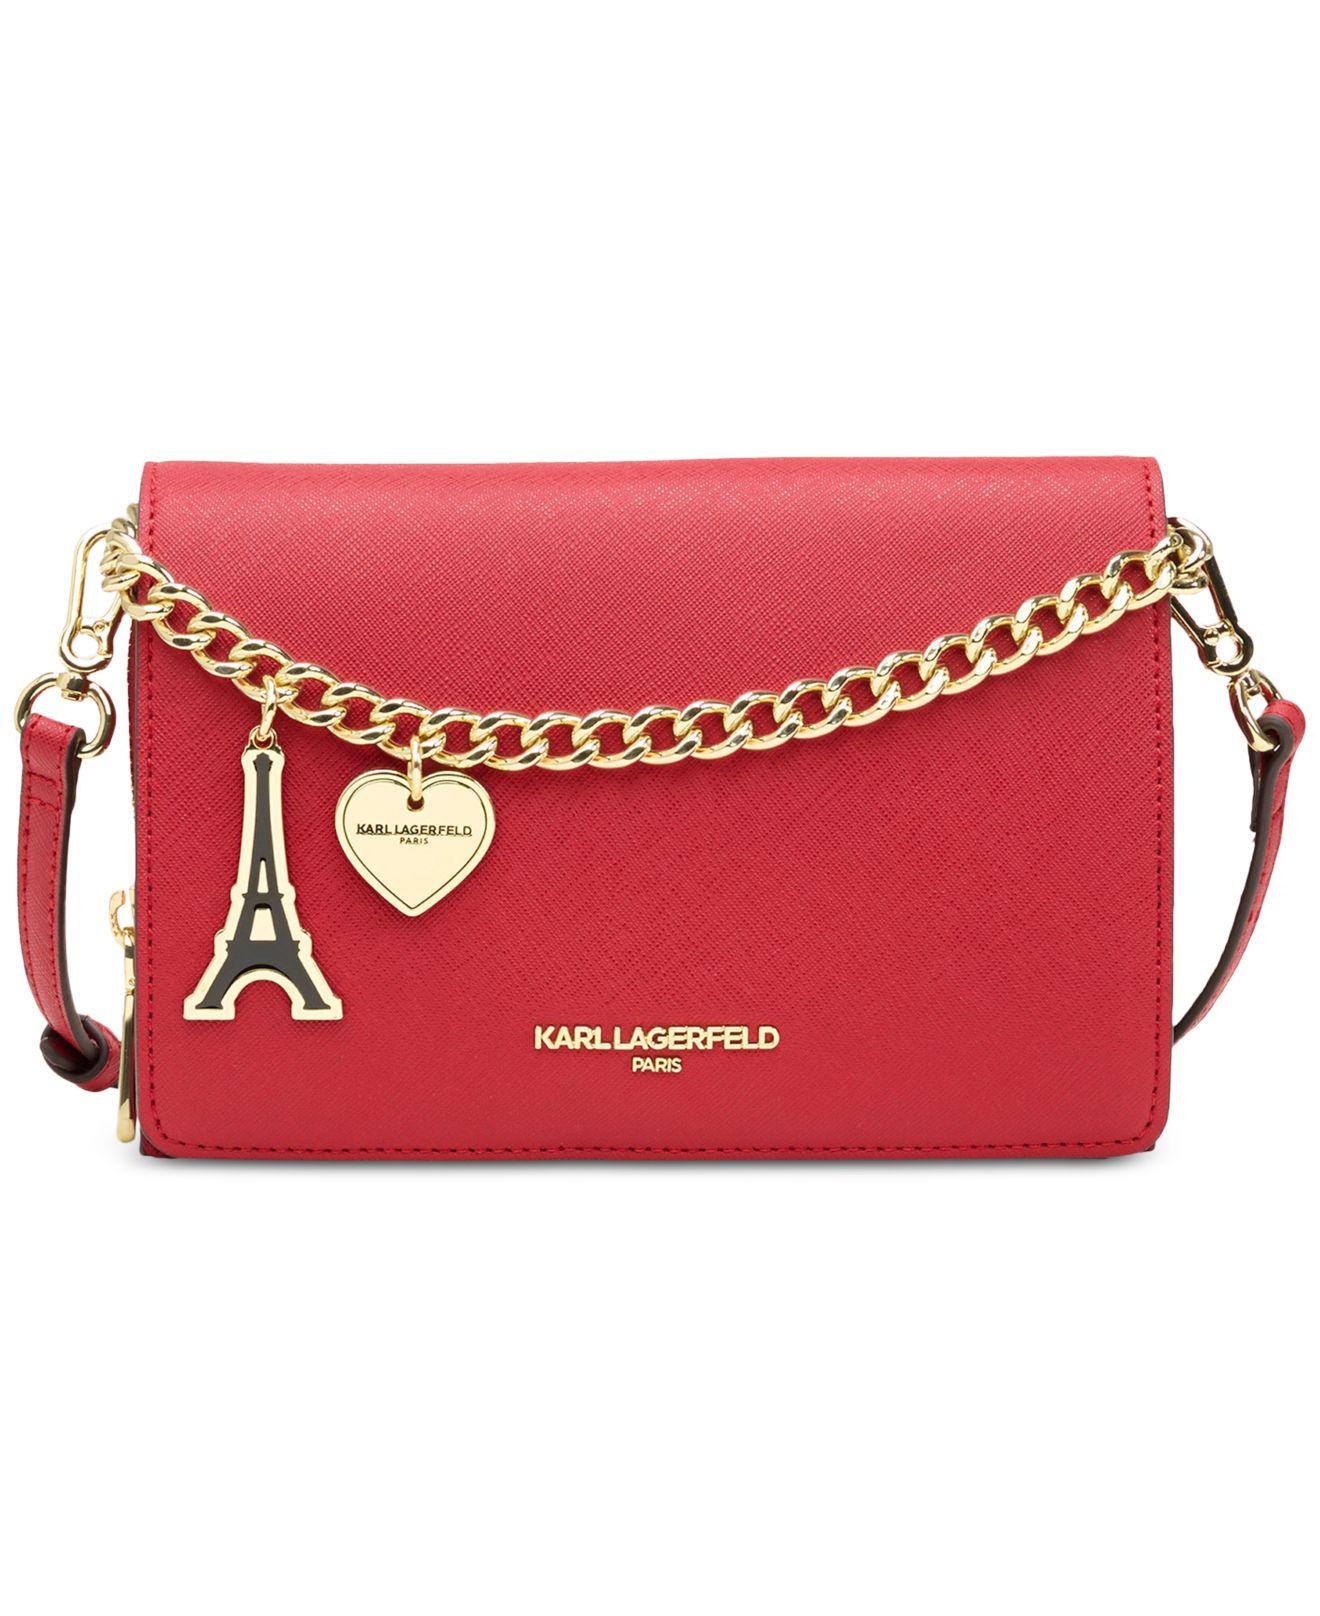 Karl Lagerfeld Gifting Faux Leather Crossbody in Red | Lyst